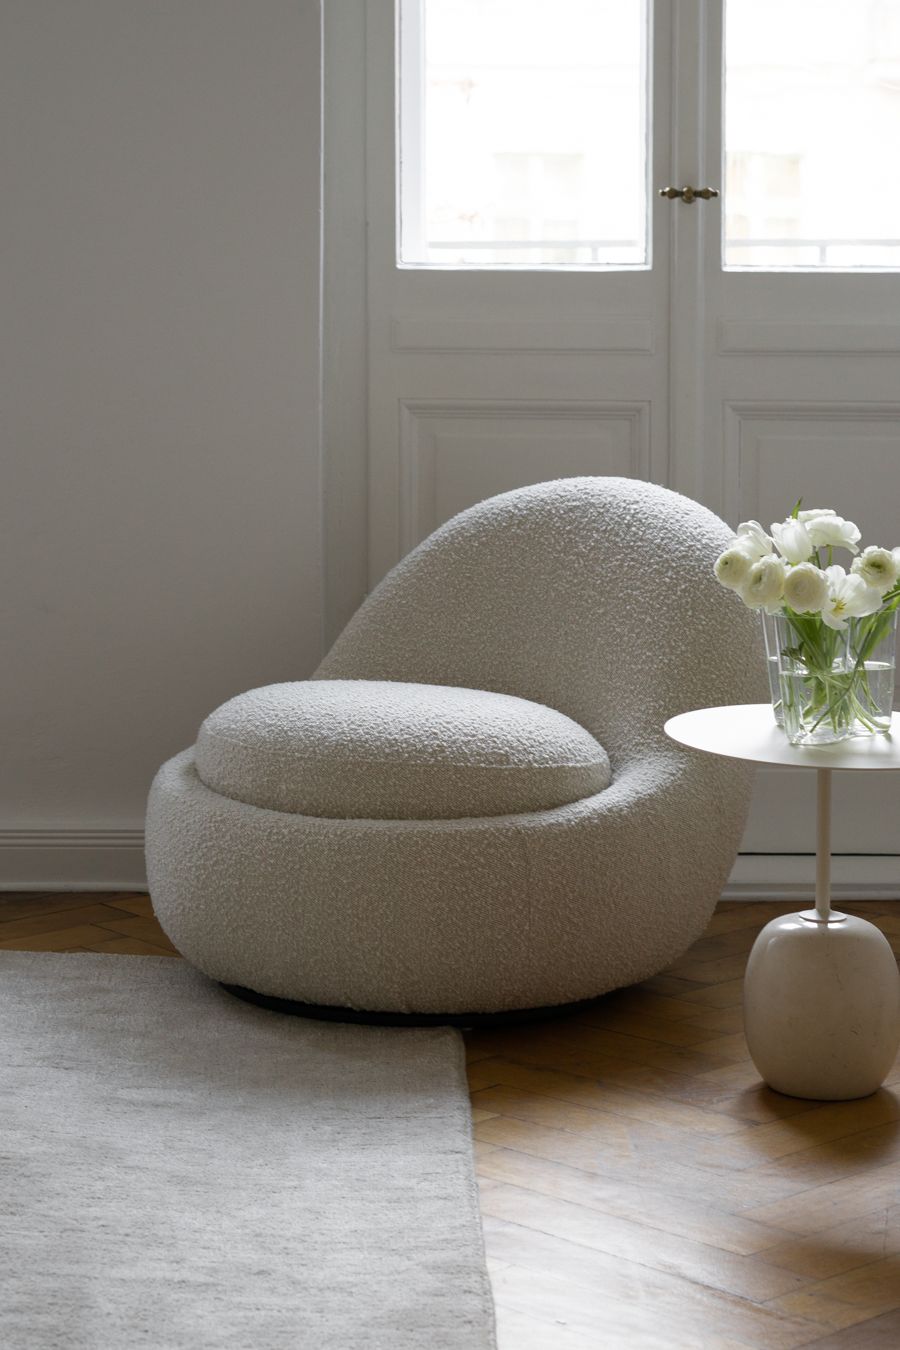 Cozy Comfort: Relax in Style with Small Chairs